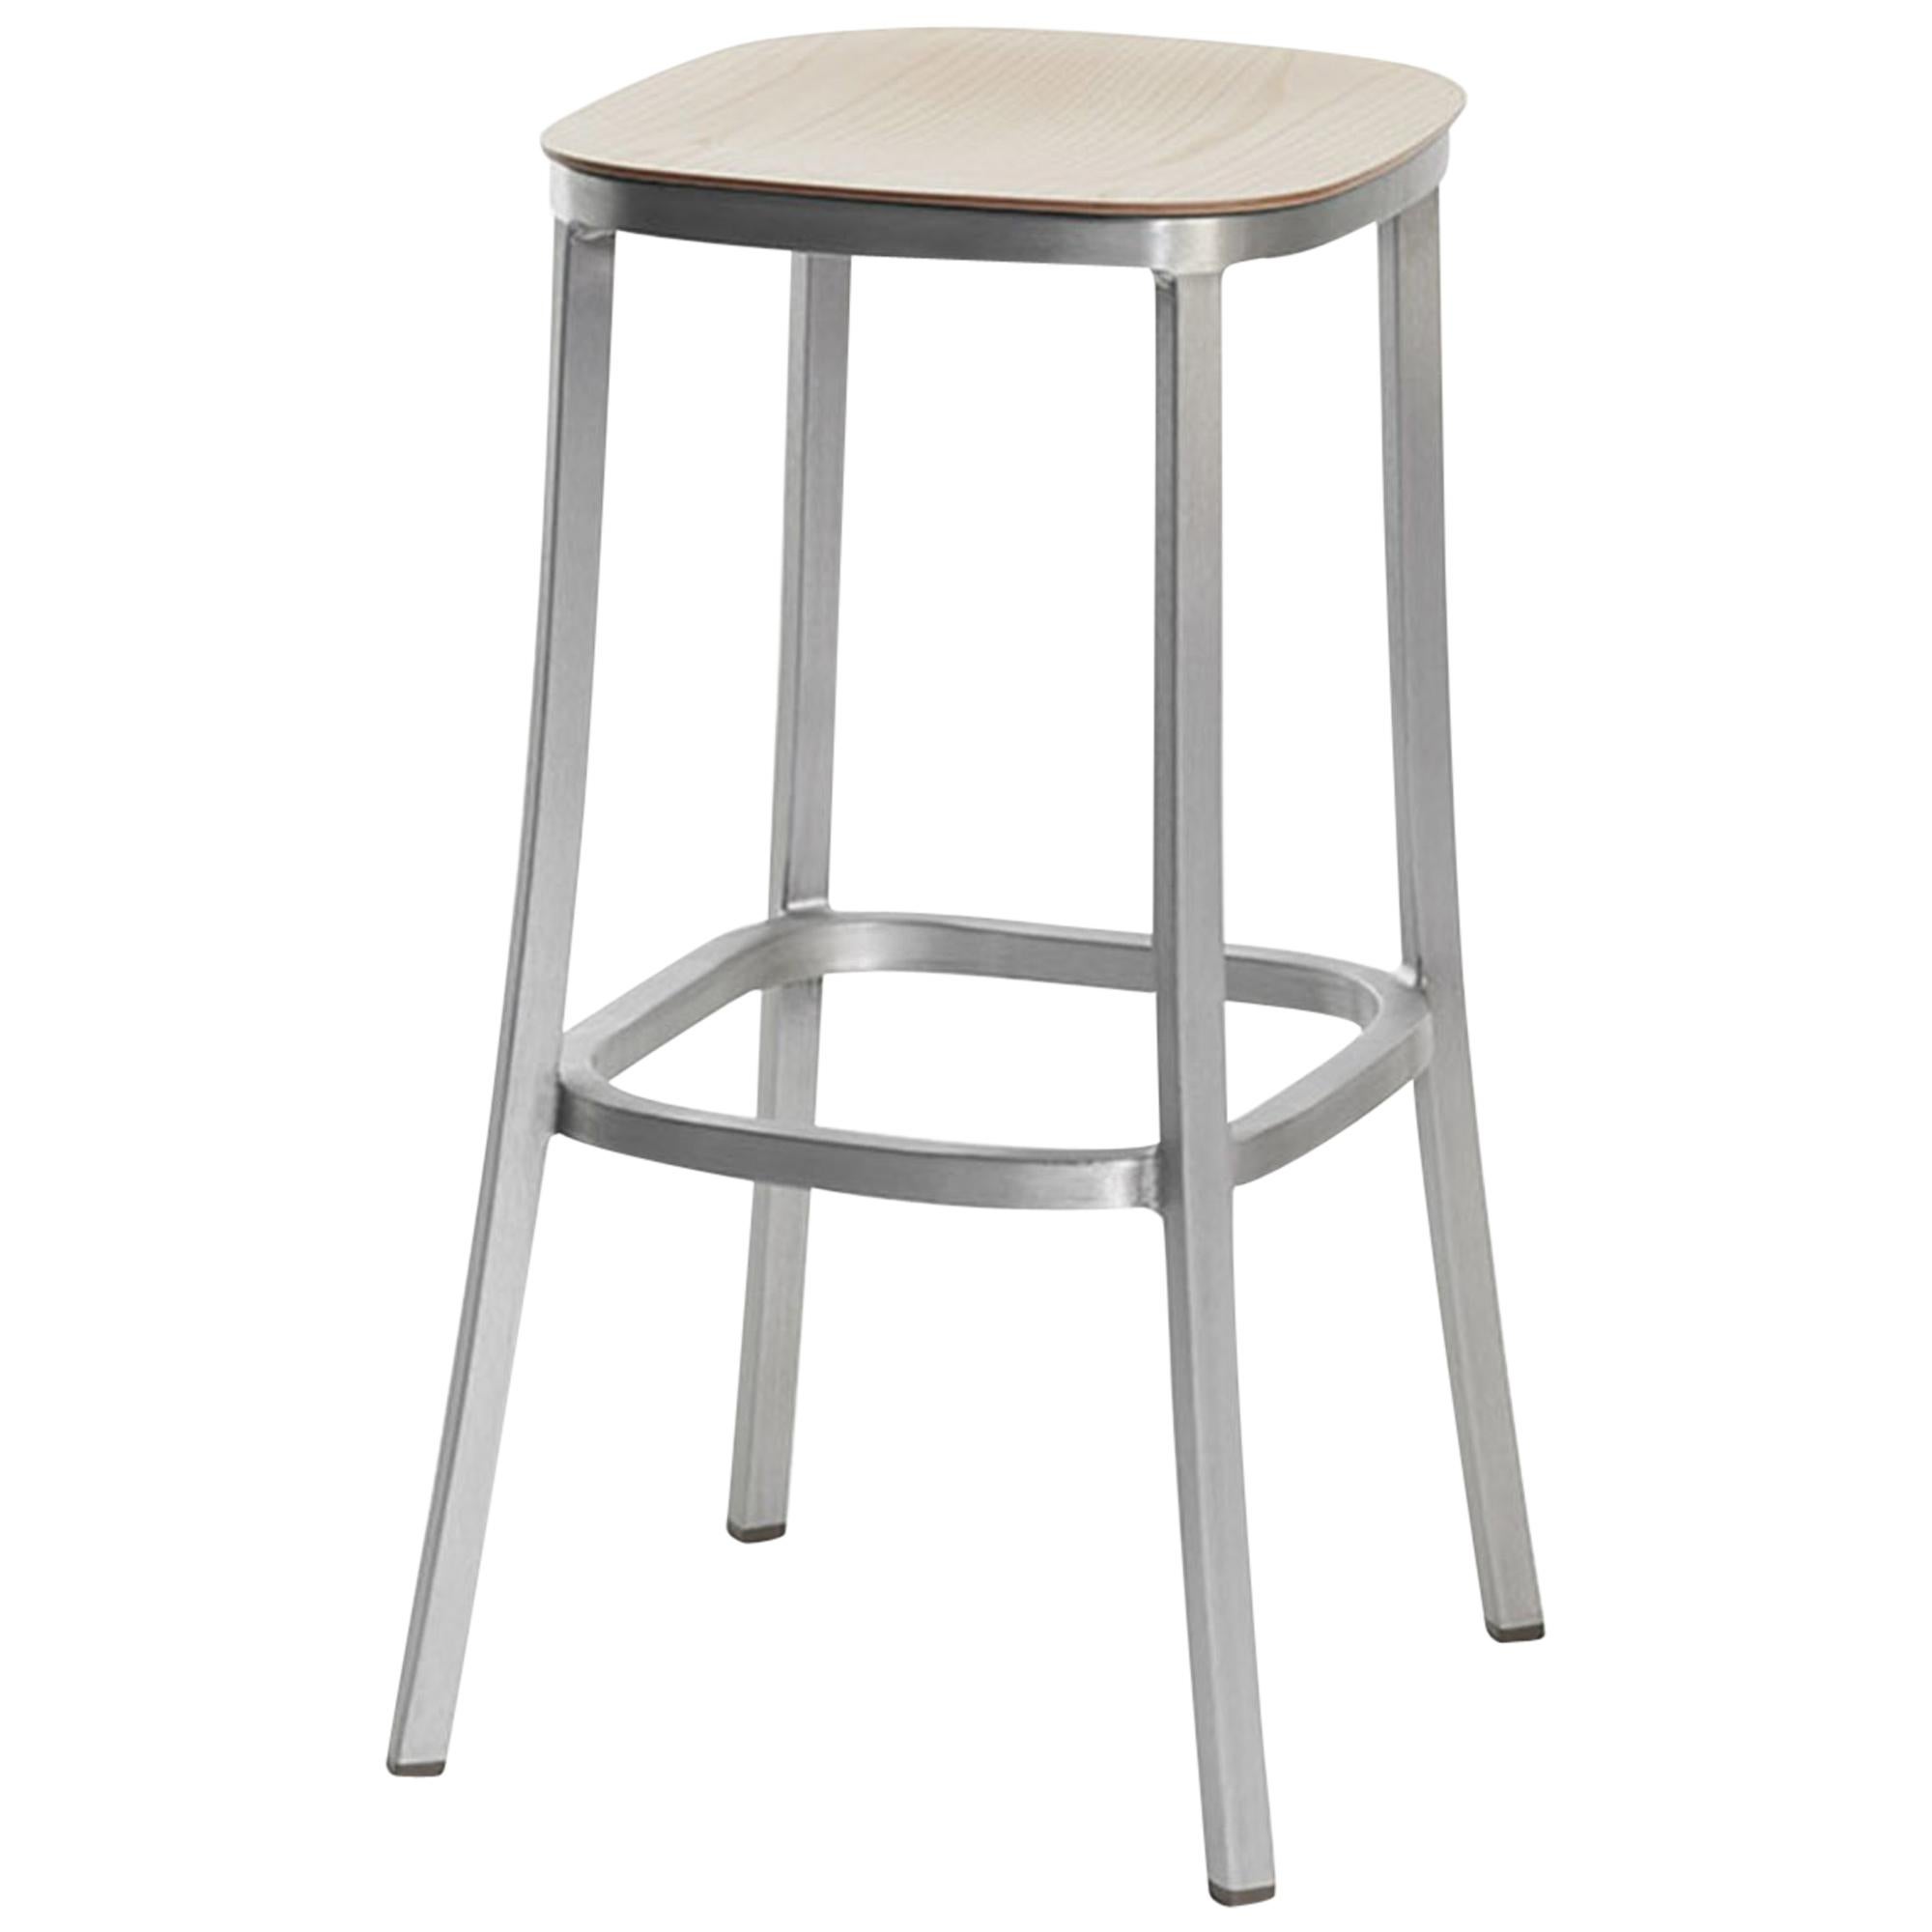 Emeco 1 Inch Barstool in Brushed Aluminum and Ash by Jasper Morrison